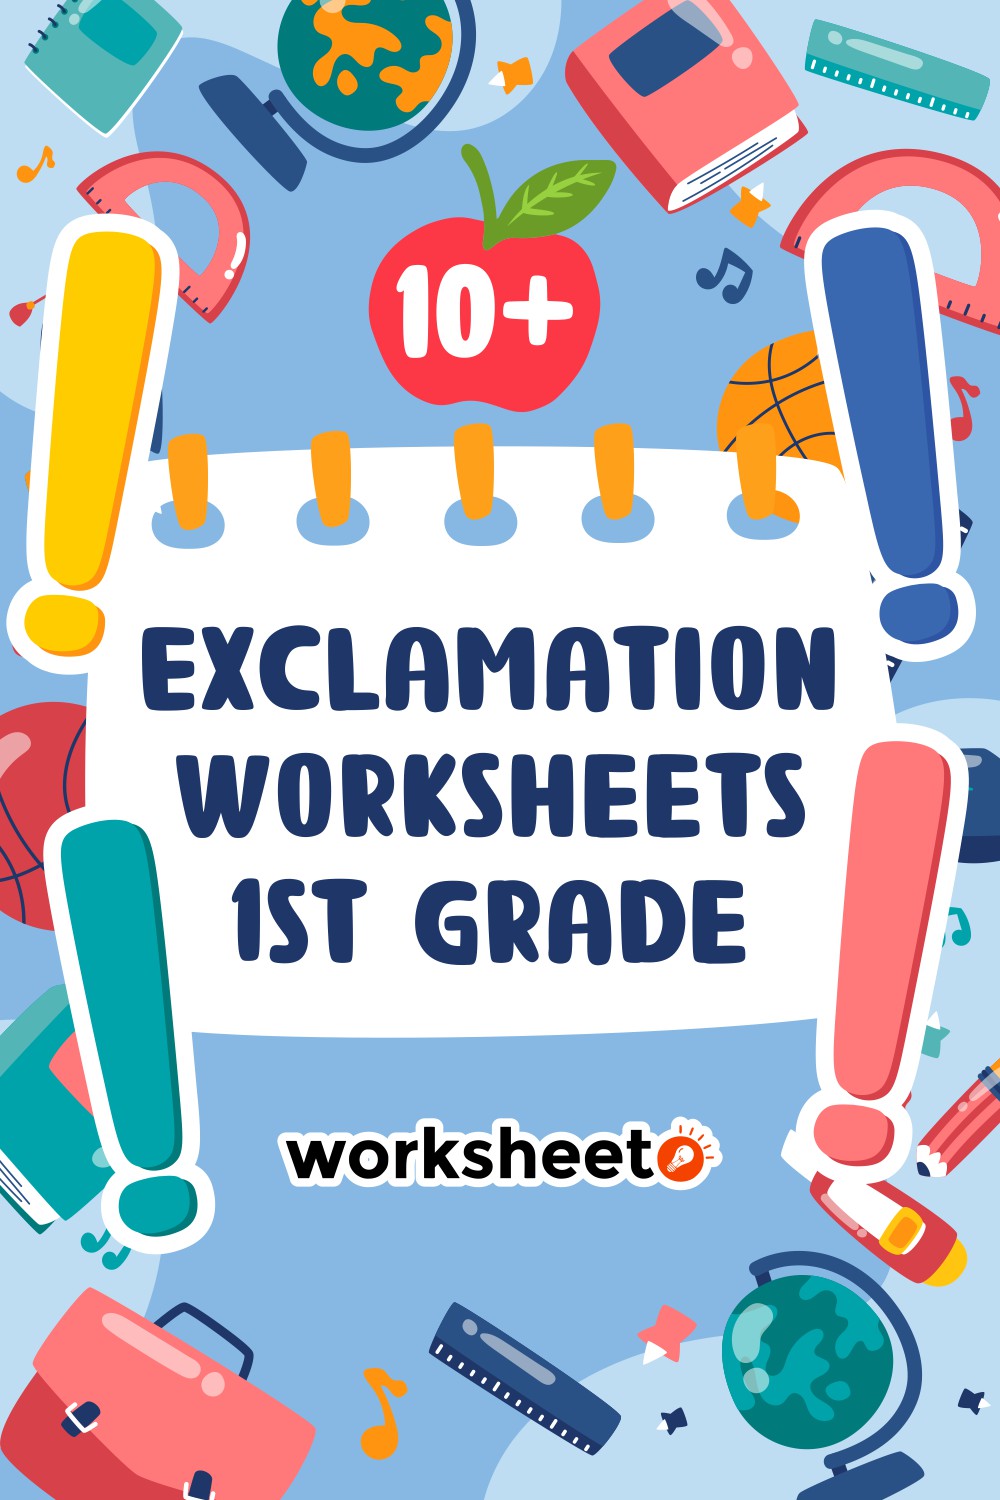 Exclamation Worksheets 1st Grade